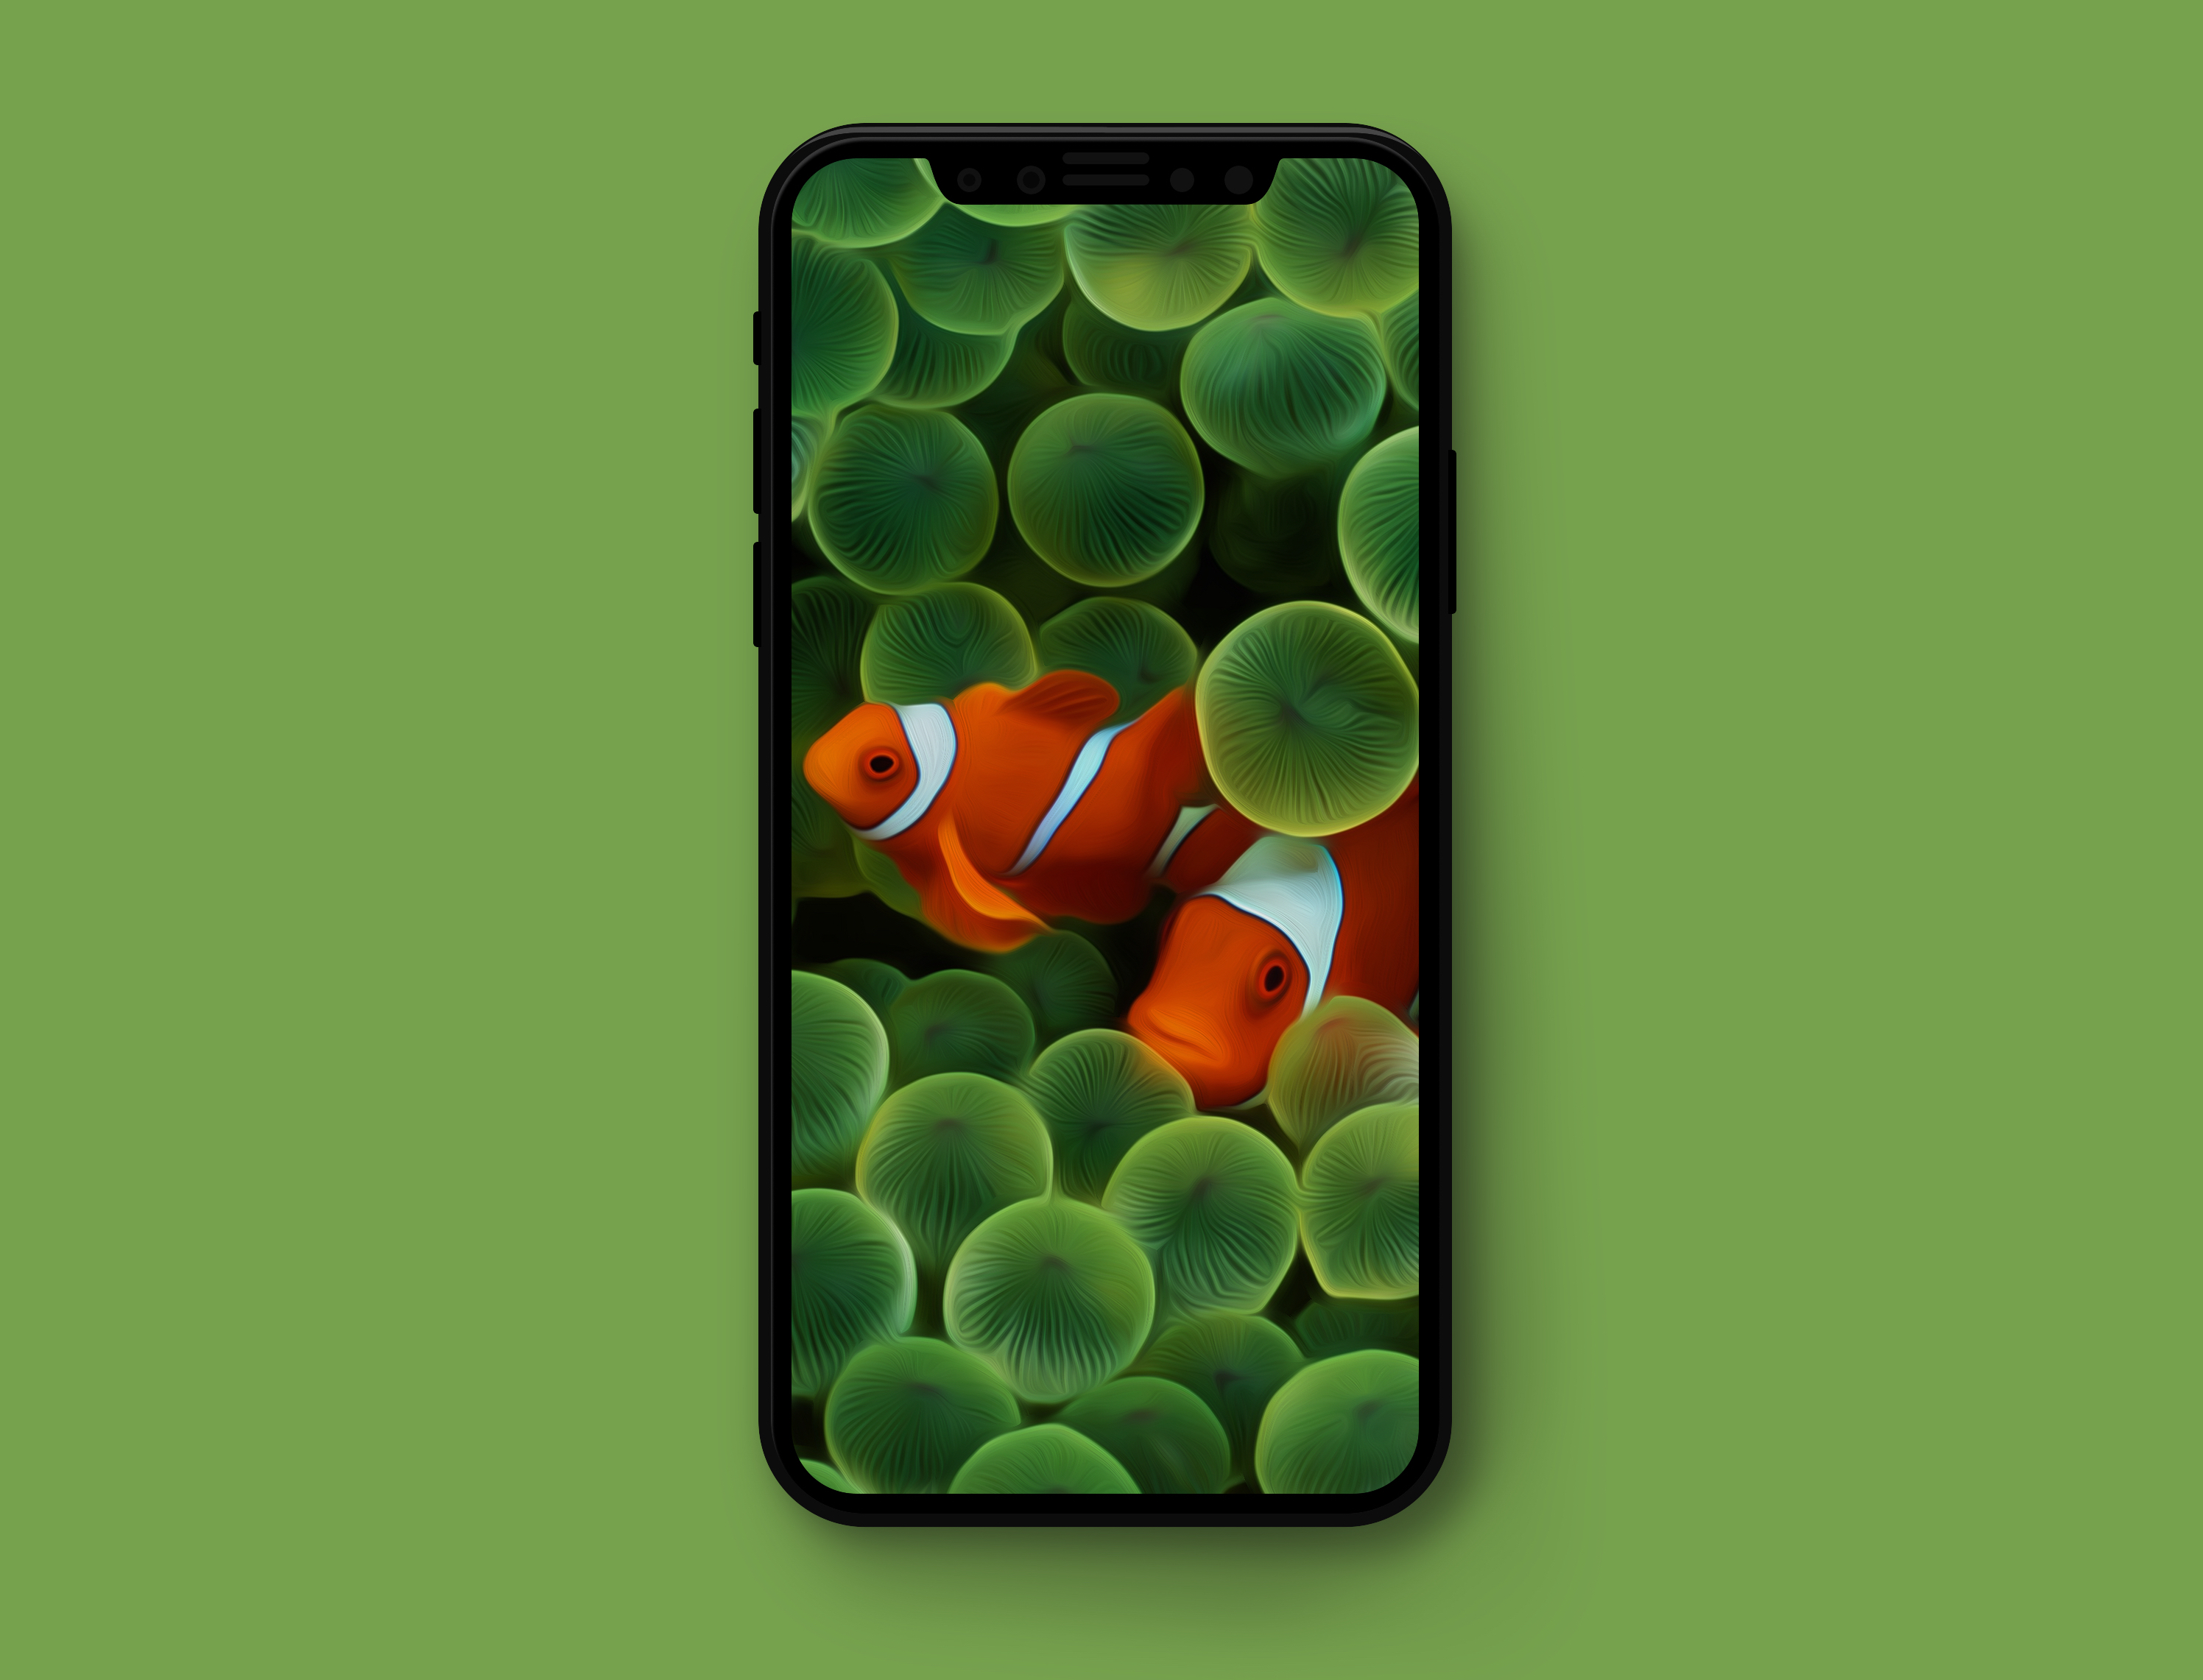 Original Apple wallpapers optimized for iPhone X